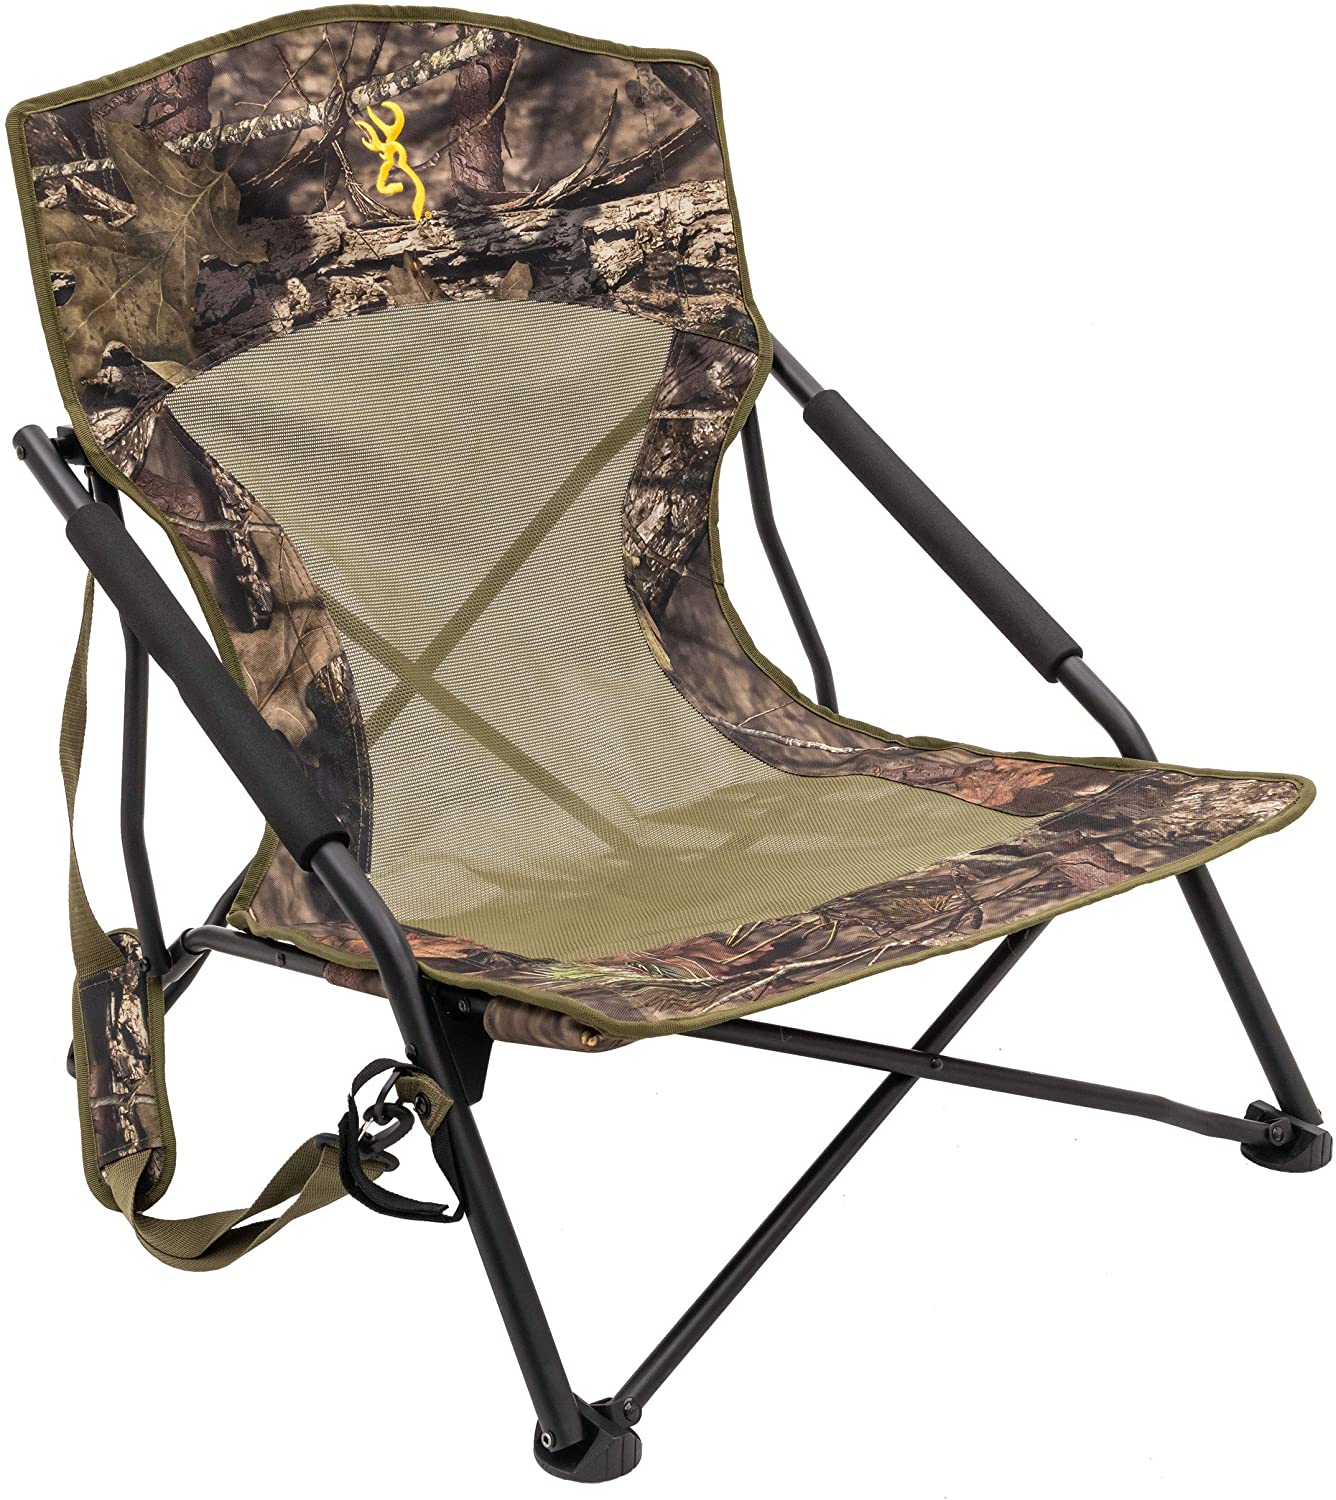 Browning Camping Strutter Hunting Chair - image 1 of 3